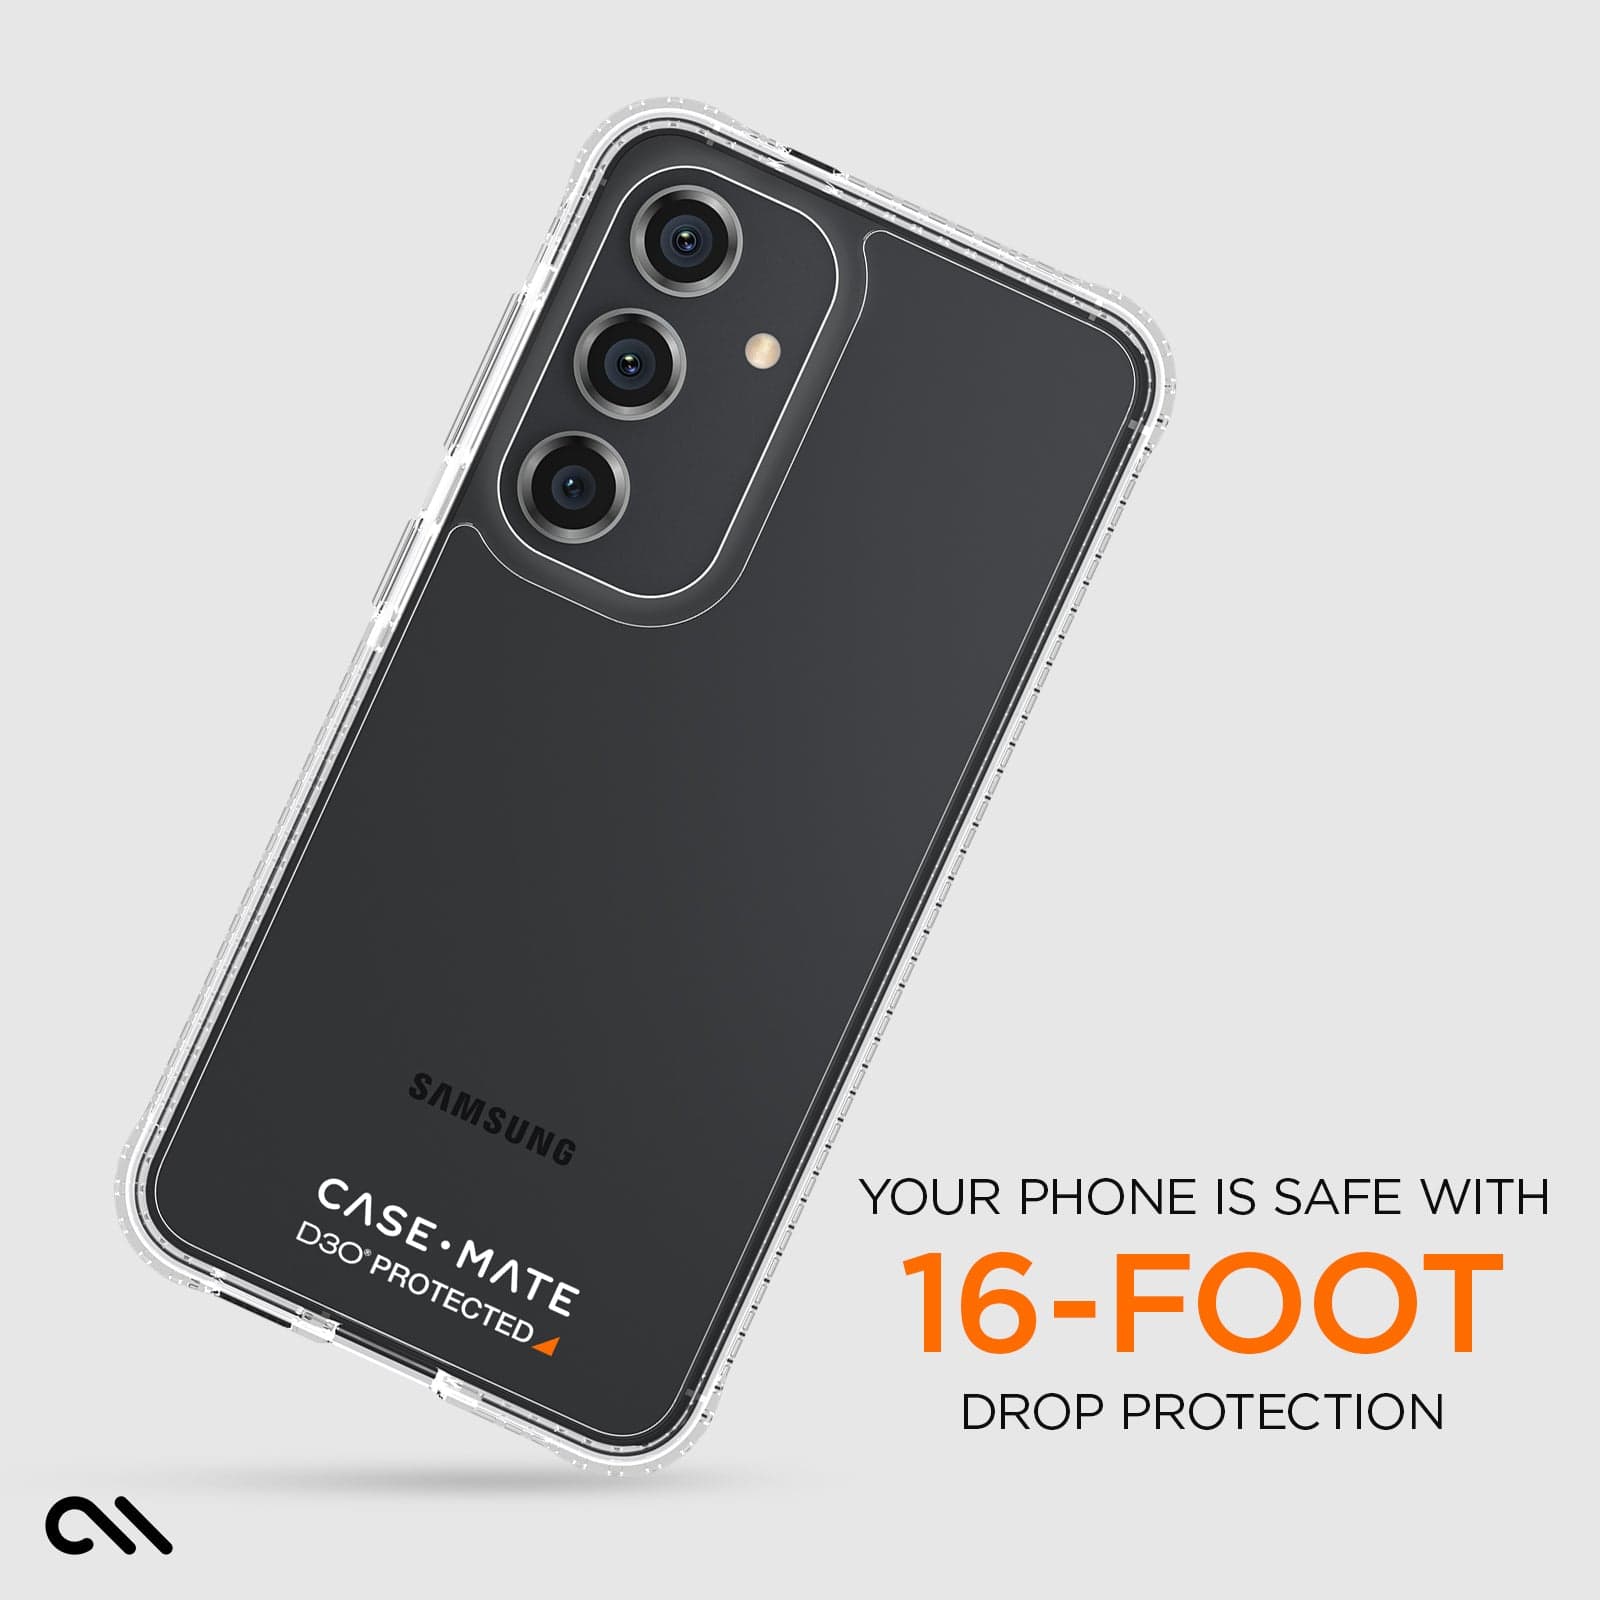 YOUR PHONE IS SAFE WITH 16-FOOT DROP PROTECTION